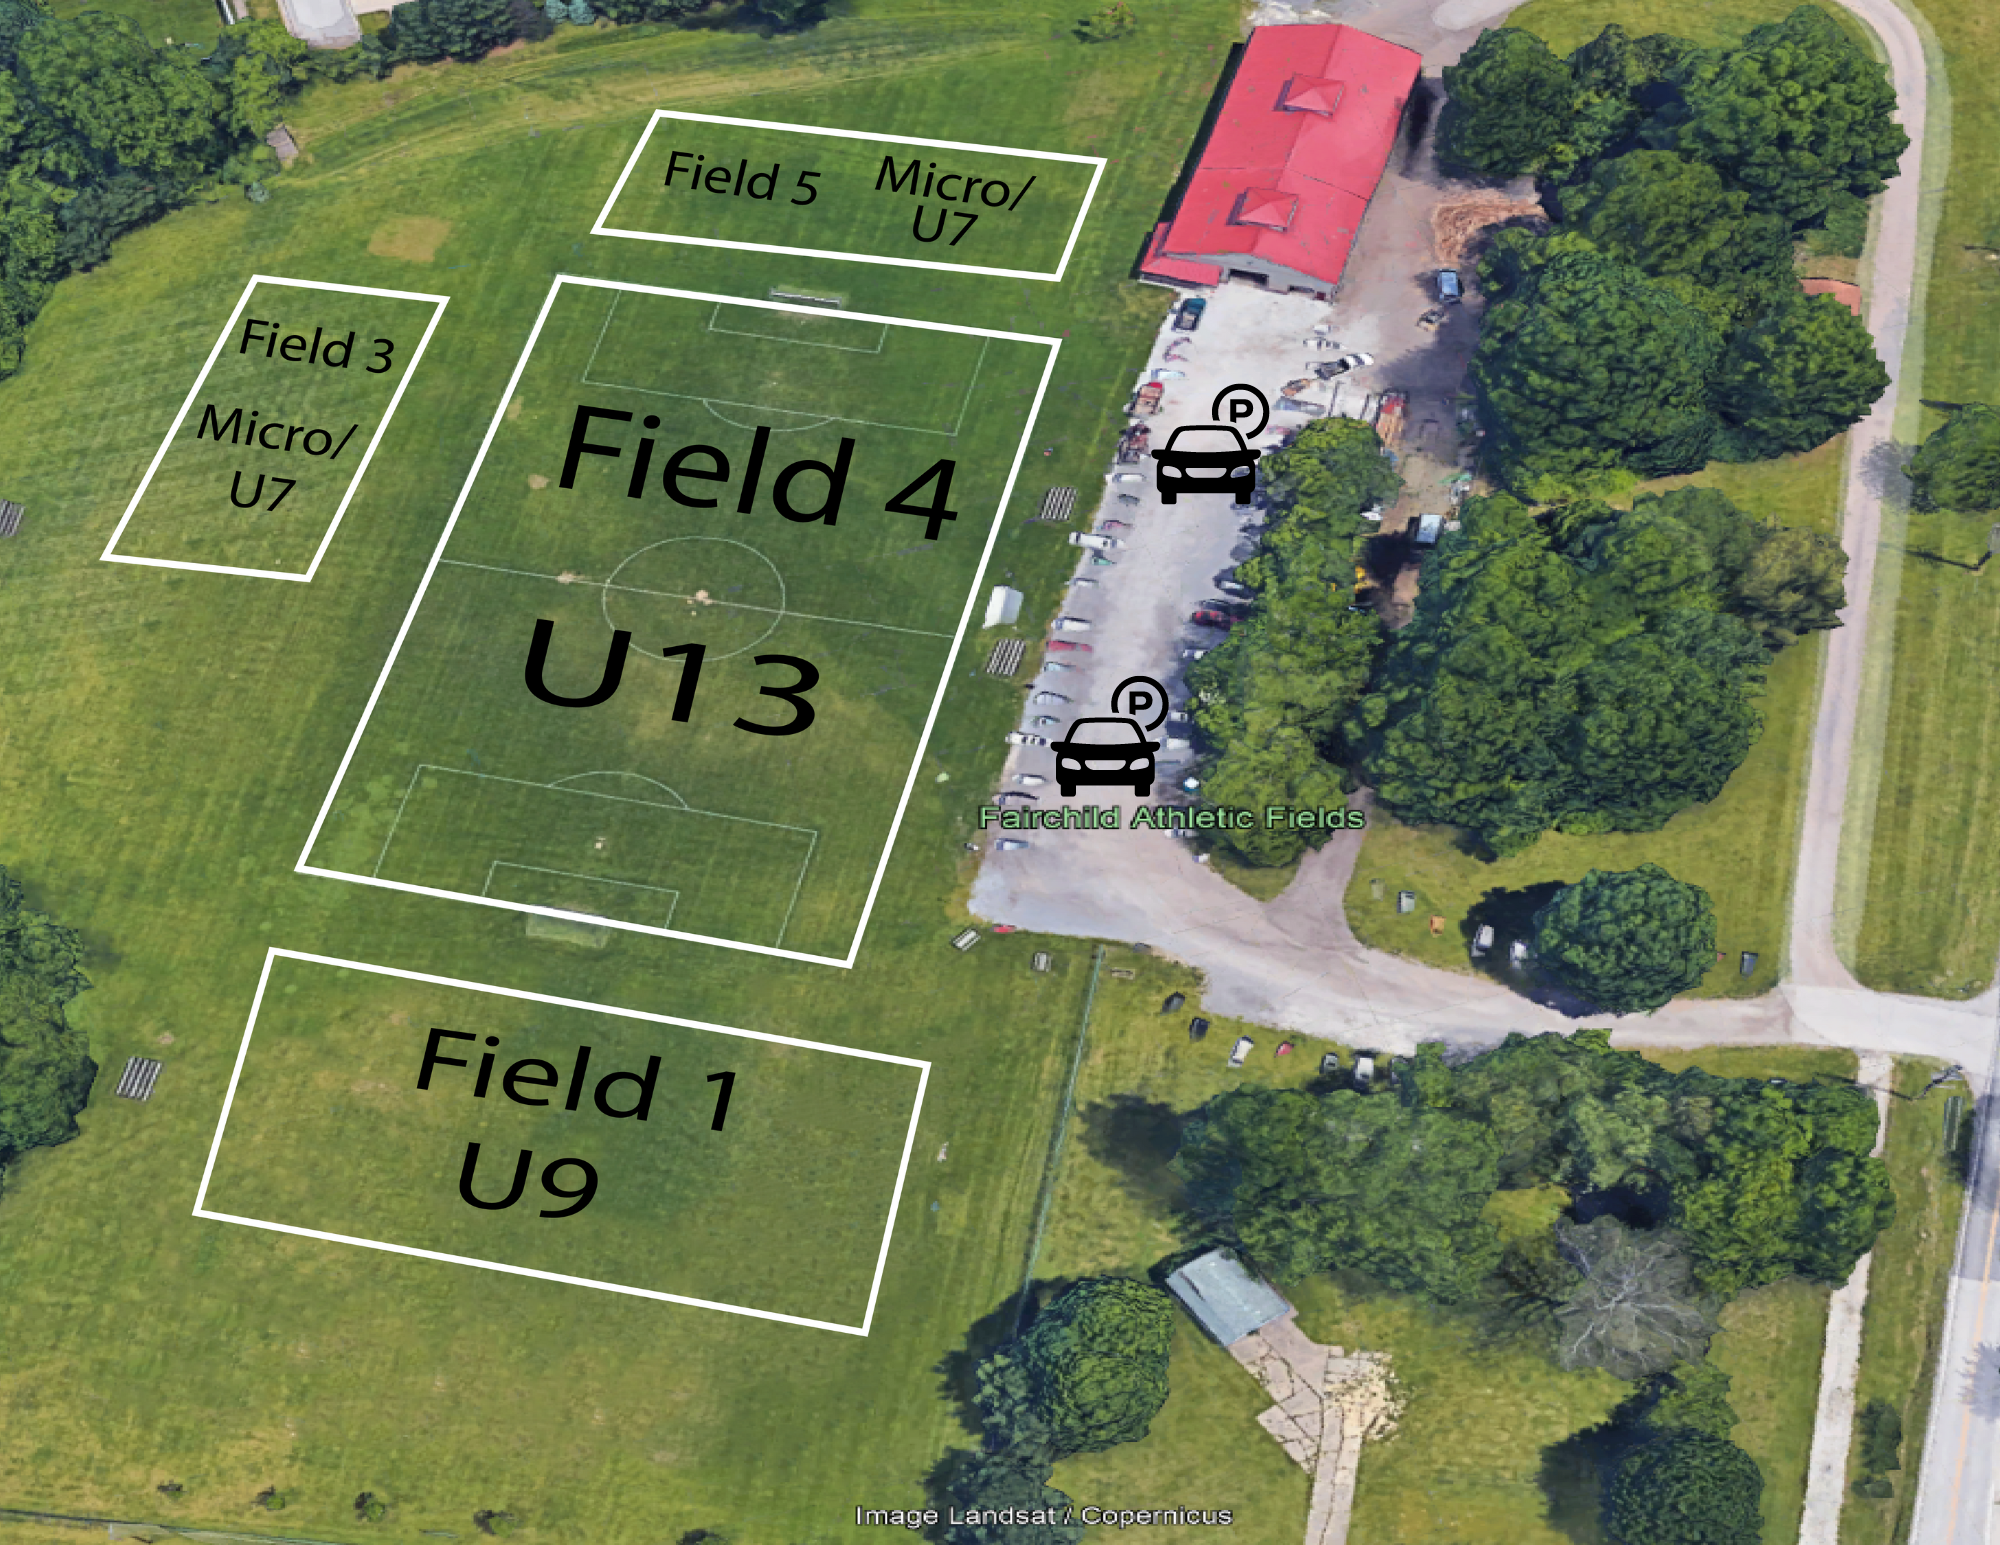 Map of Fairchild Athletic Fields